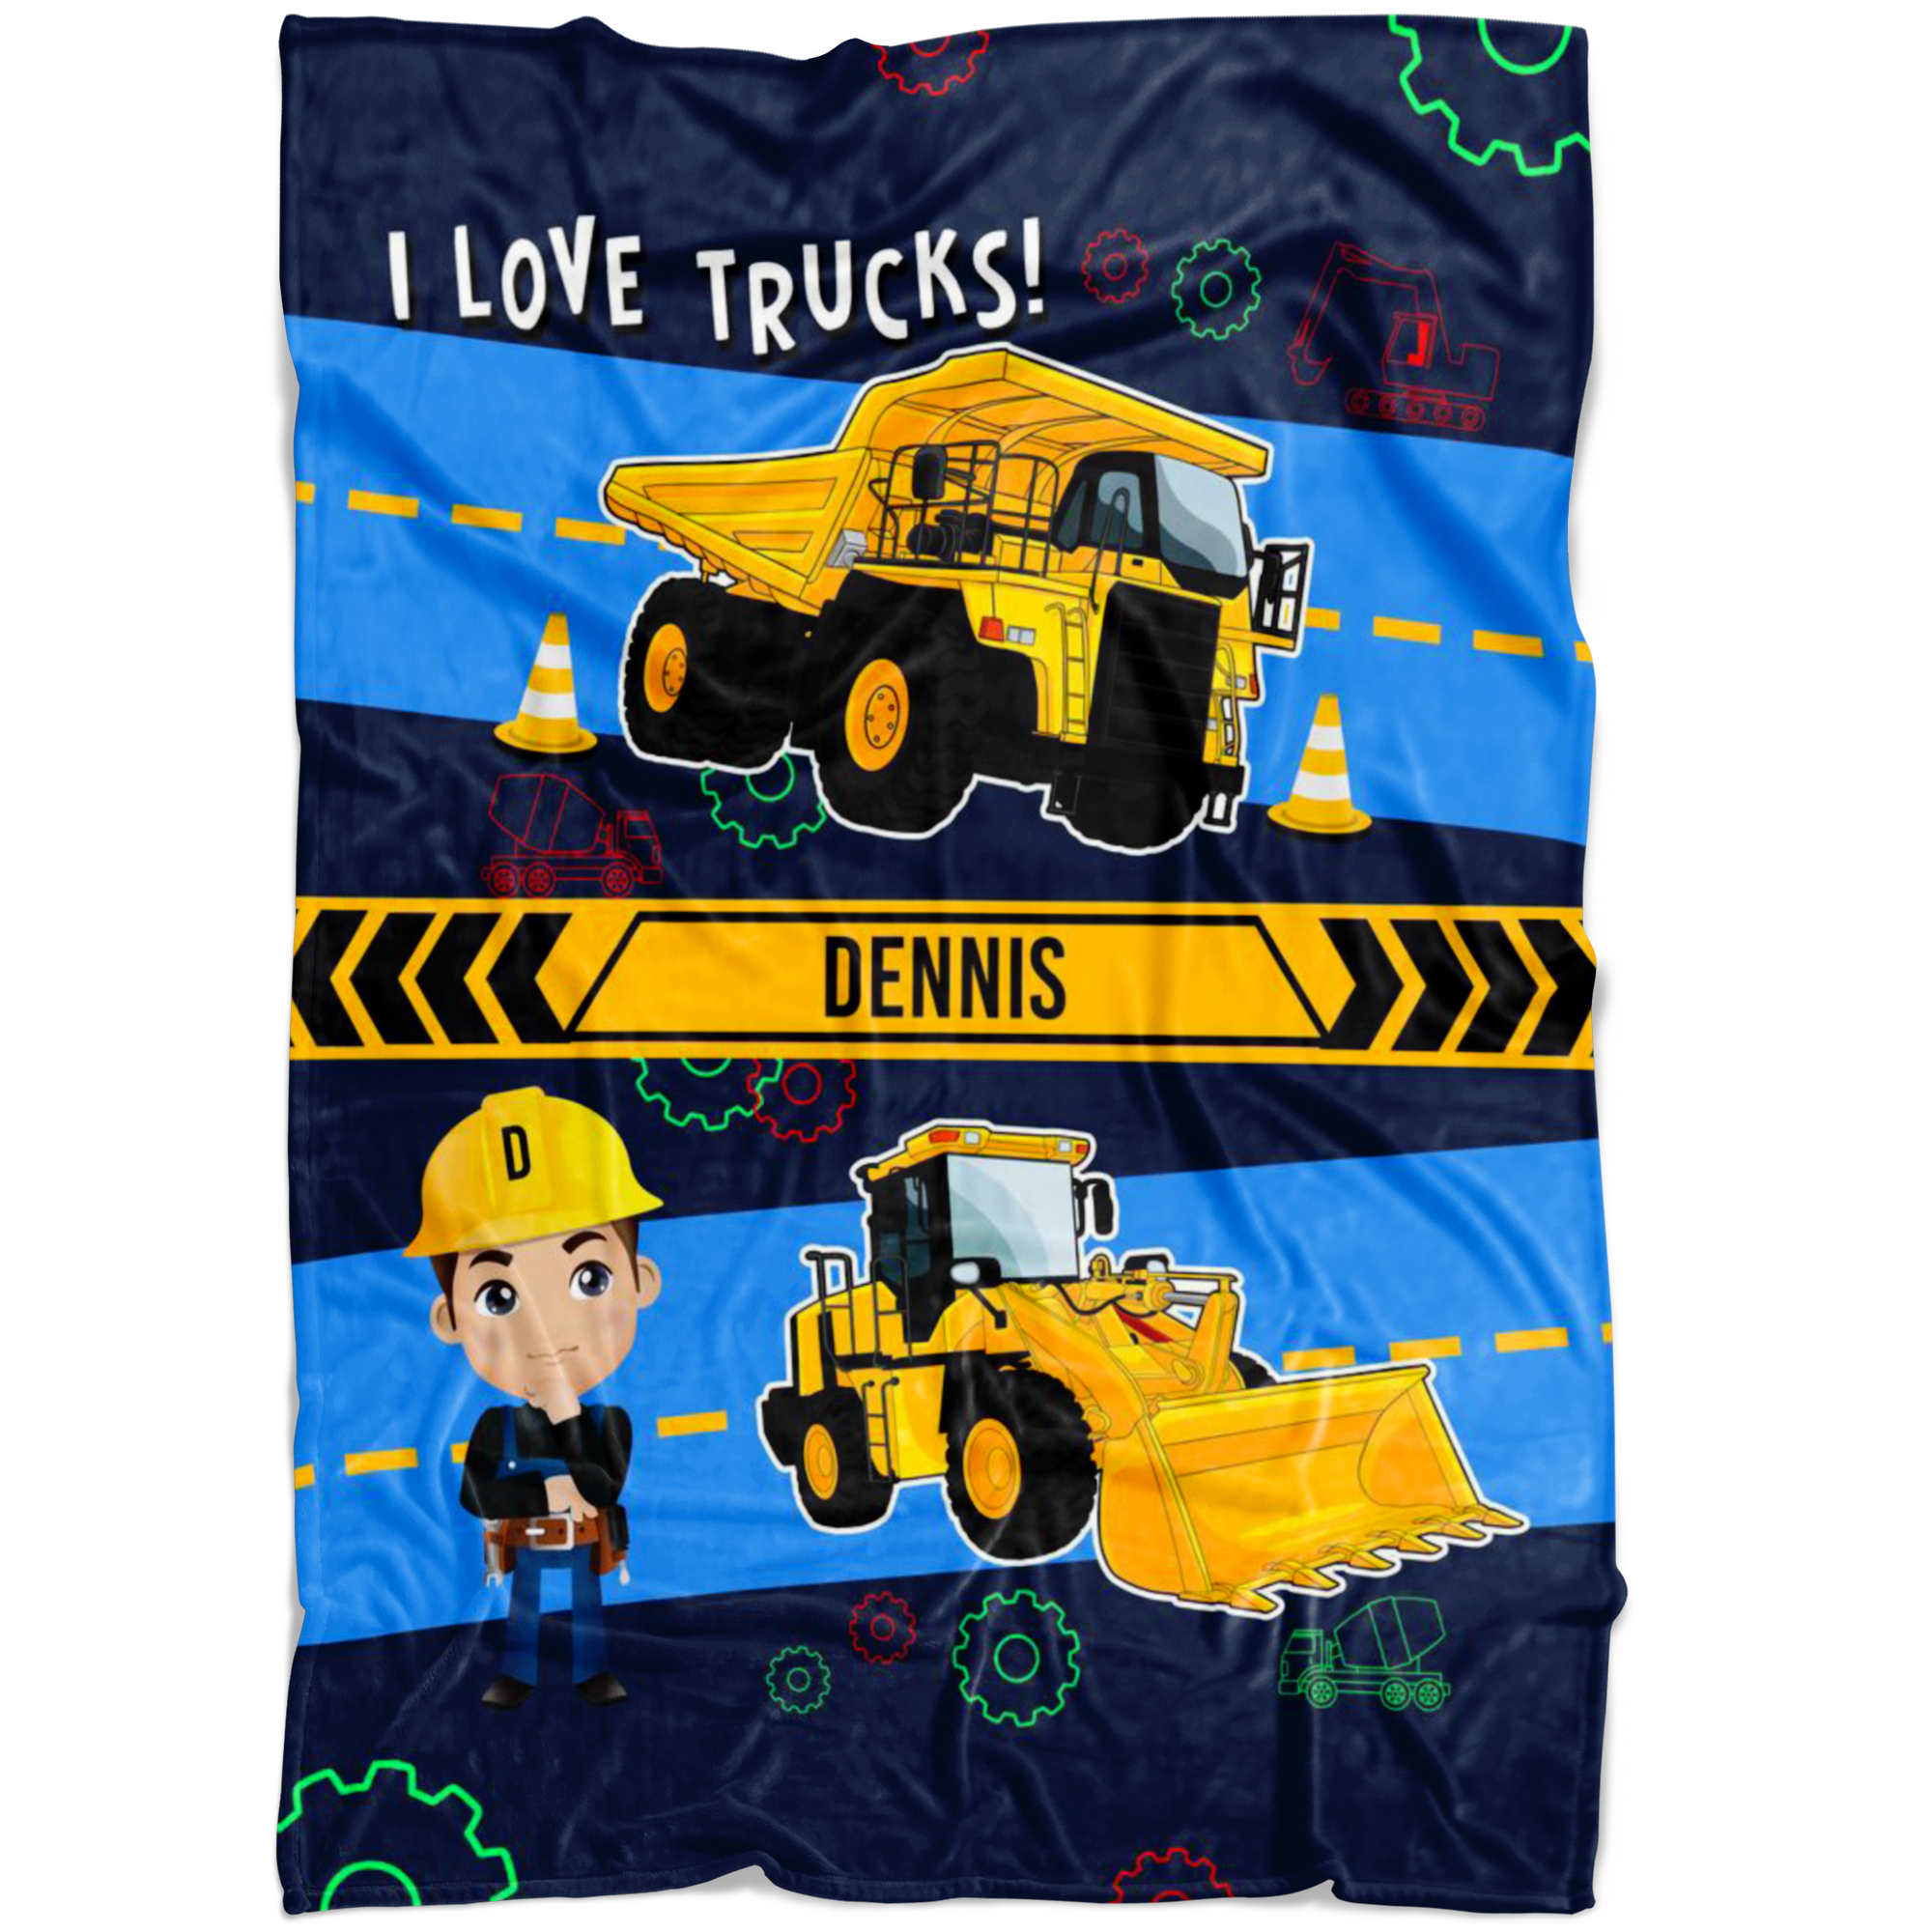 Personalized Name I Love Trucks Blanket for Boys & Girls with Character Personalization - Dennis